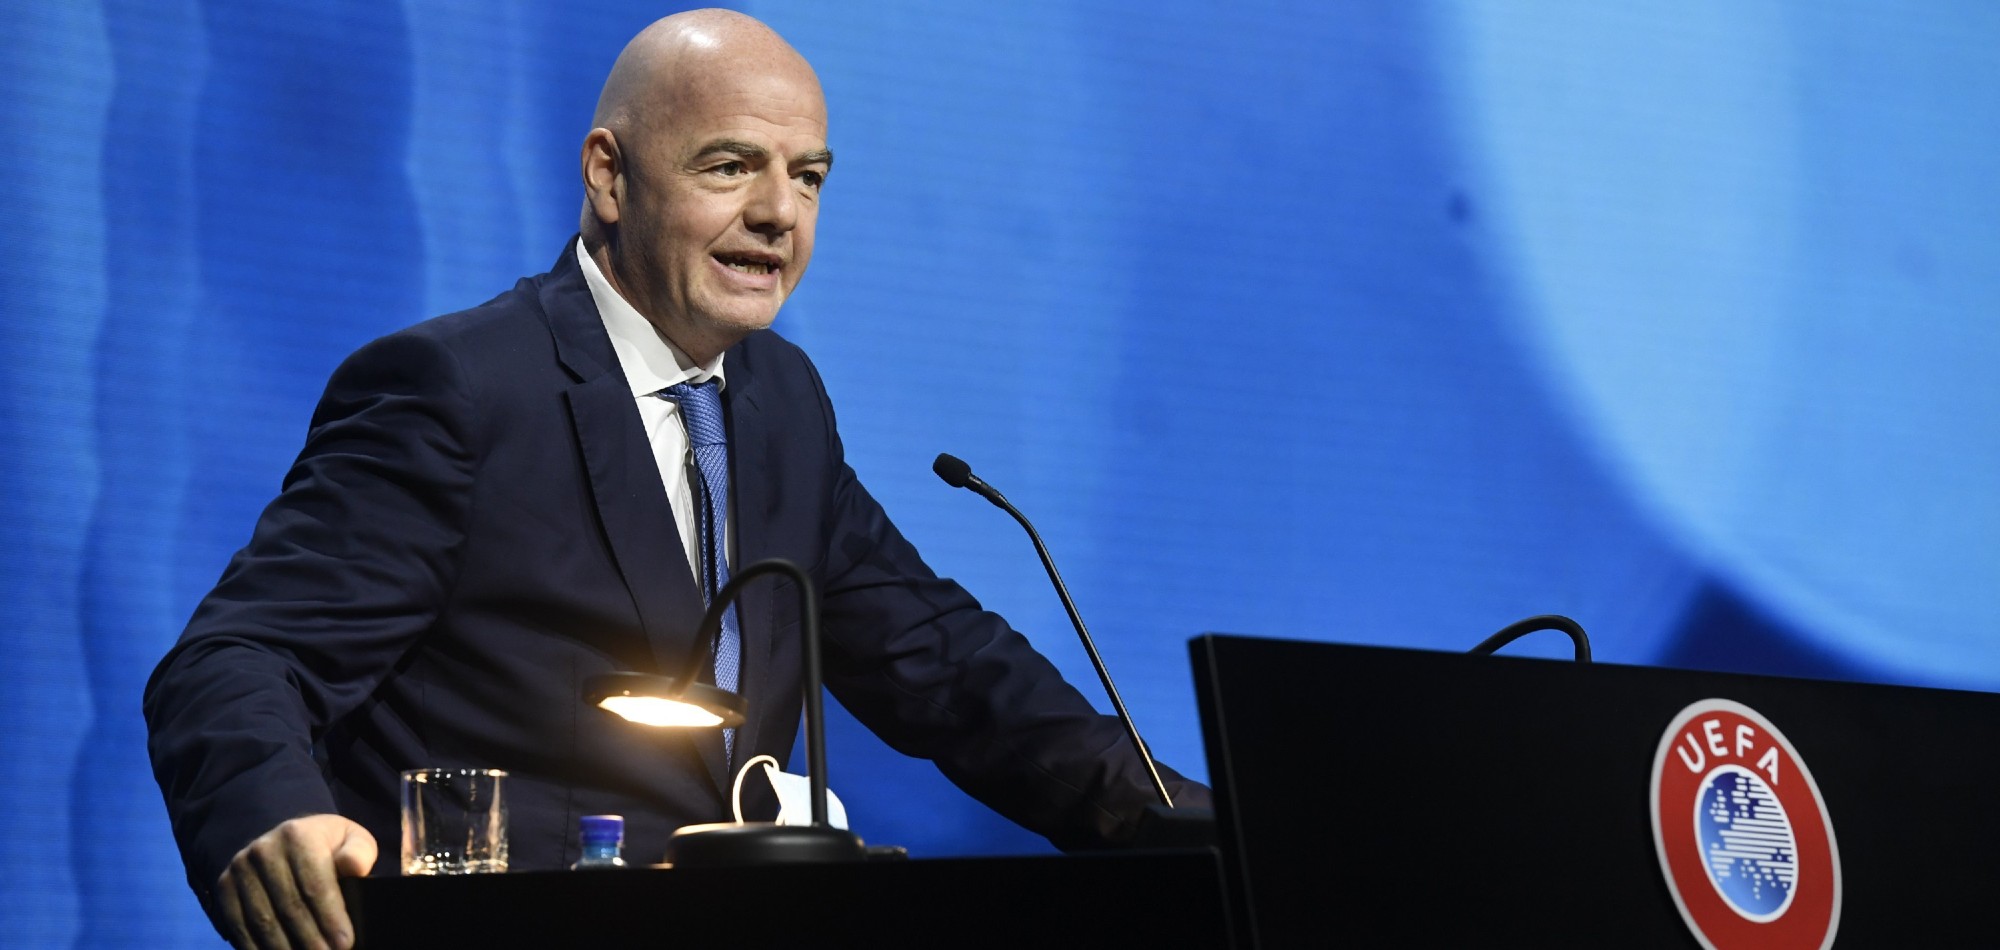  FIFA president Infantino says Super League clubs  "must live with the consequences of their choice"